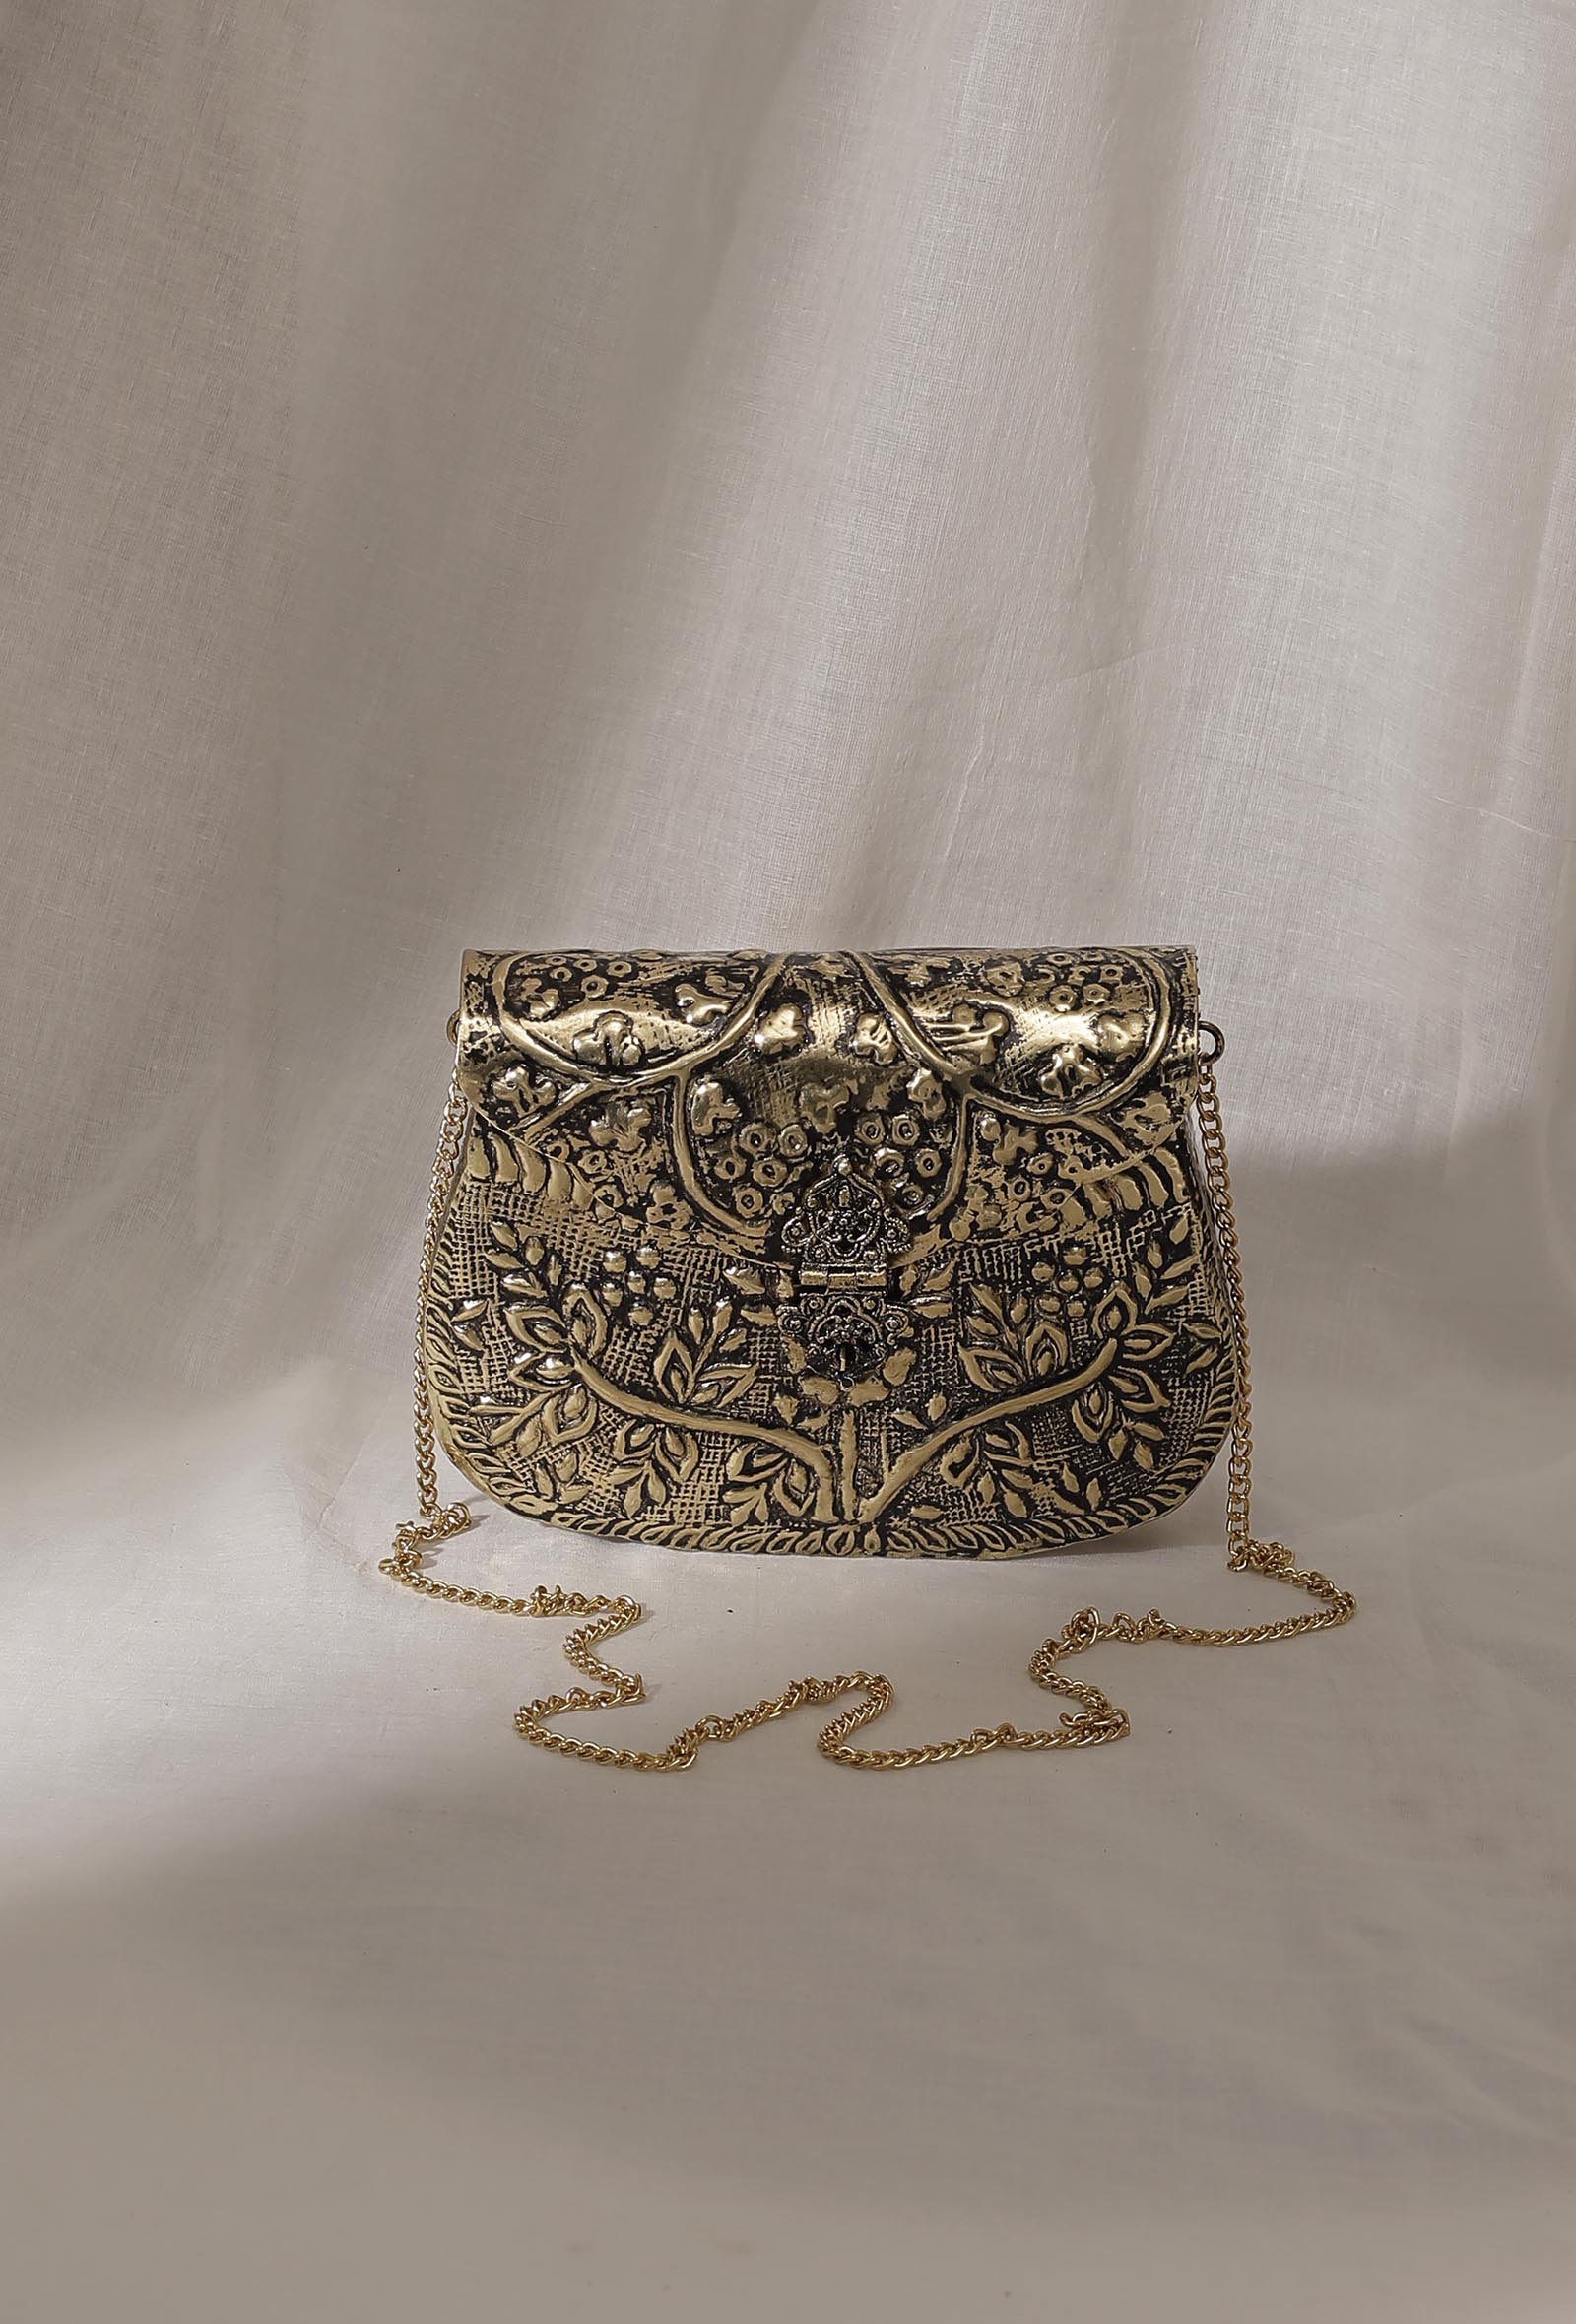 Buy Indian Gold Sequin Clutch Purse, Bag With Designer Pattern, Embroidery,  Velvet Fabric, Shoulder Strap and Handle for Wedding & Ethnic Wear. Online  in India - Etsy